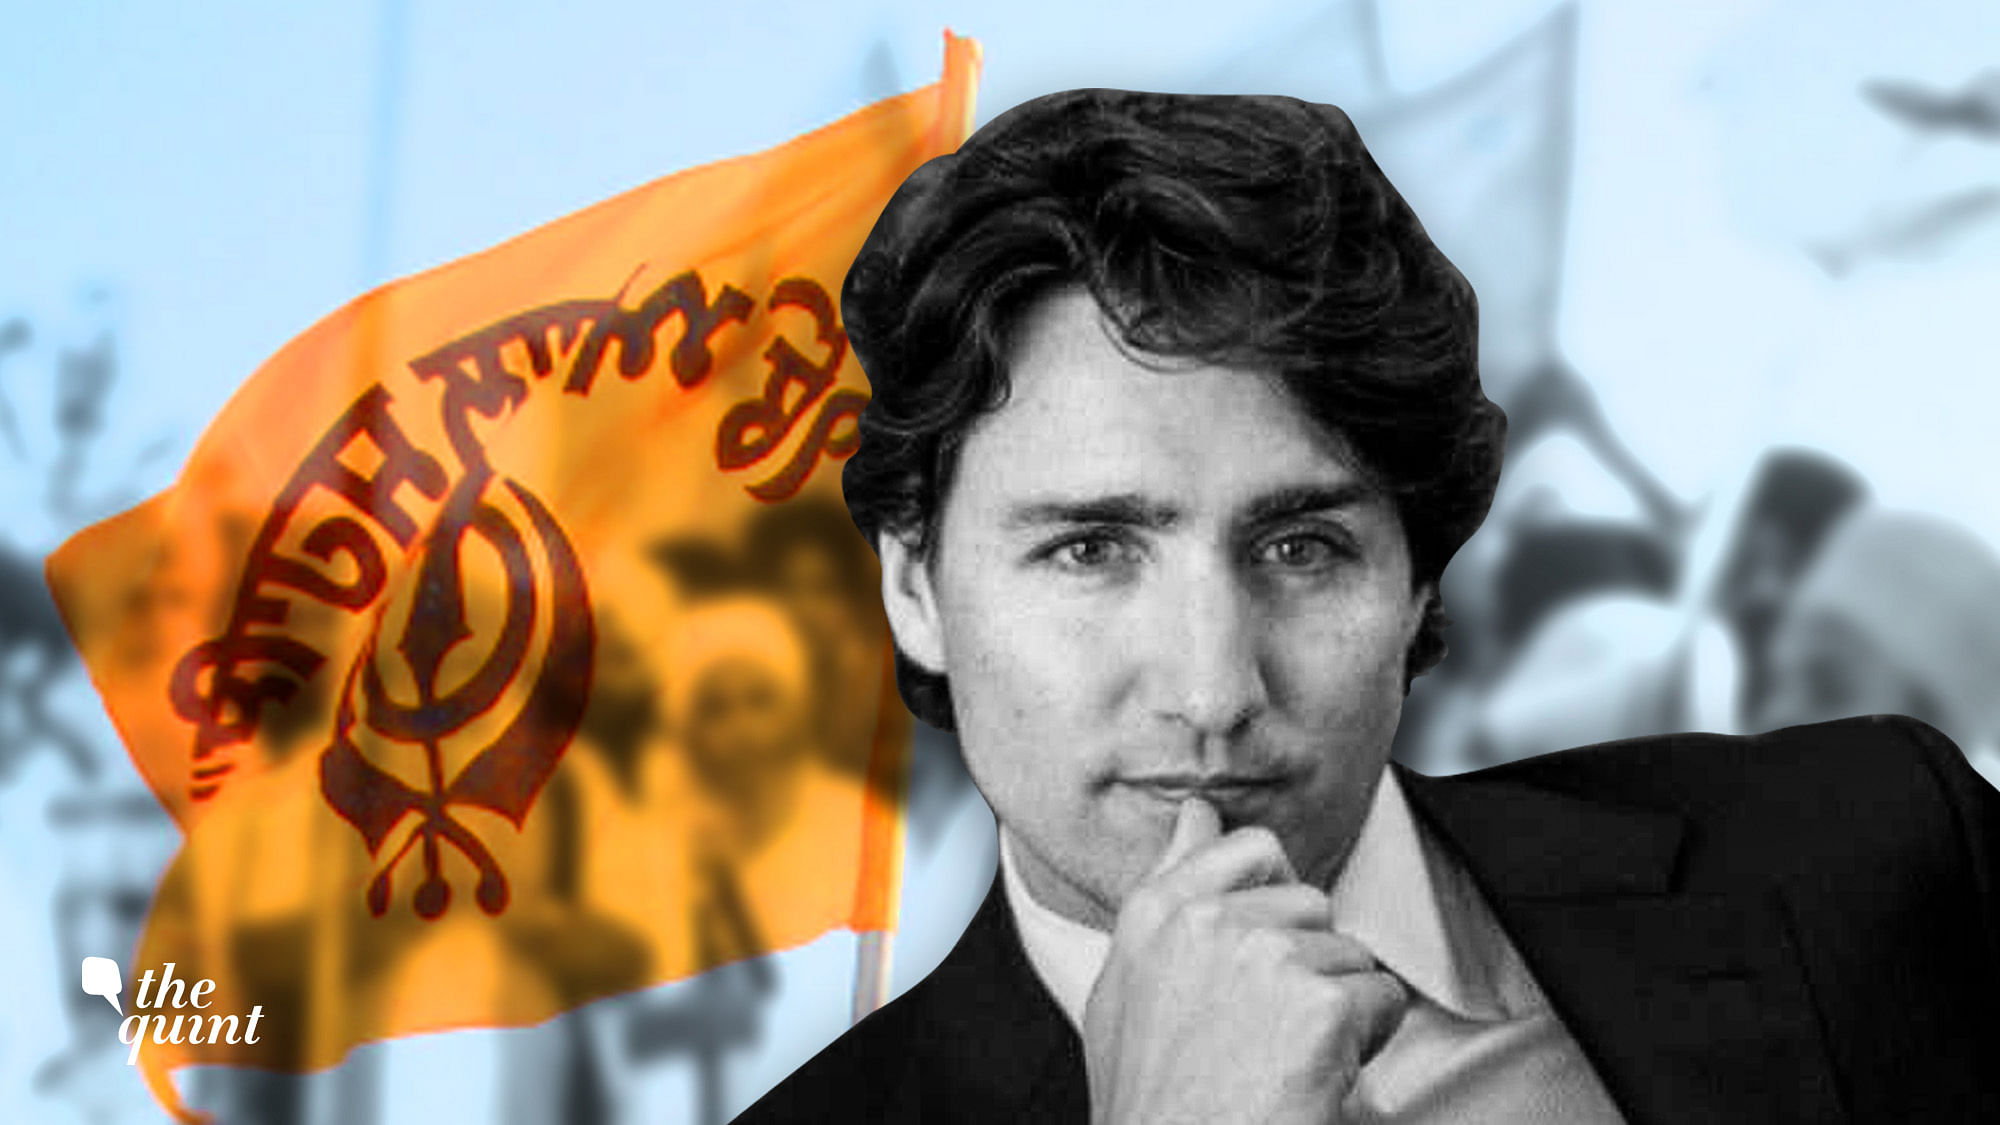 Canadian PM Justin Trudeau lands in Delhi in the middle of a diplomatic spat.